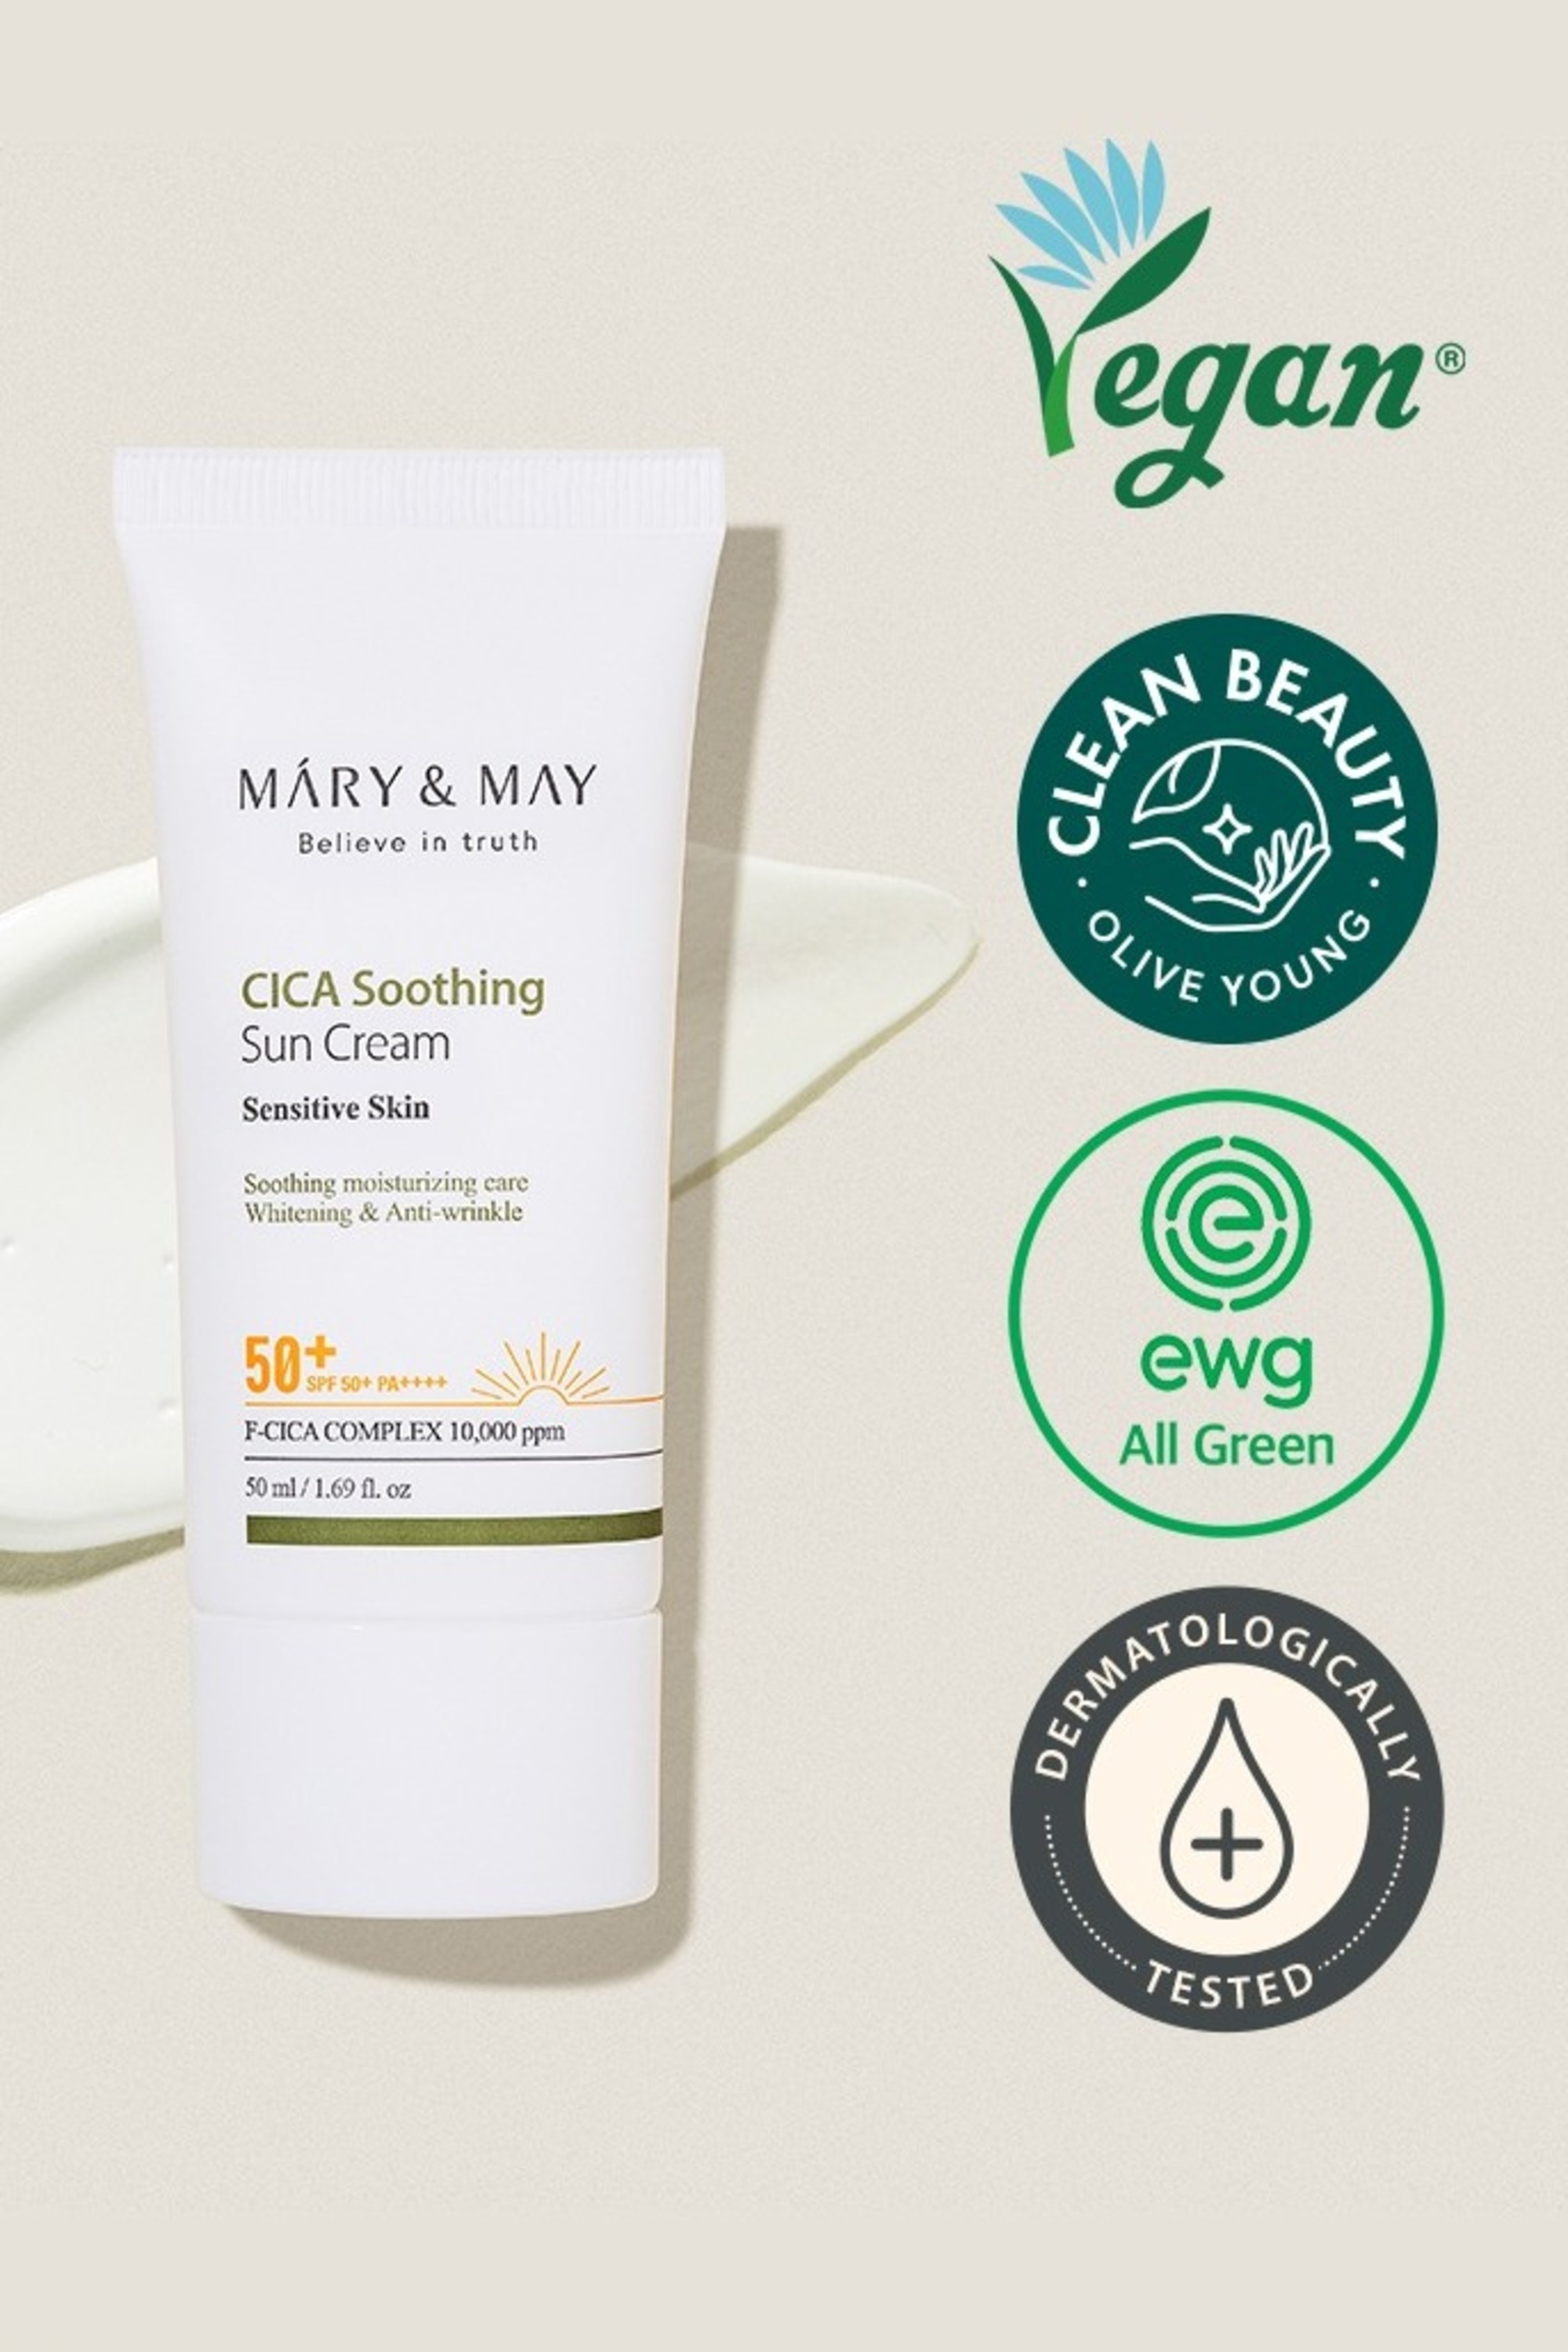  MARY & MAY CICA Soothing Sun Cream SPF50+ PA++++ 50 мл 